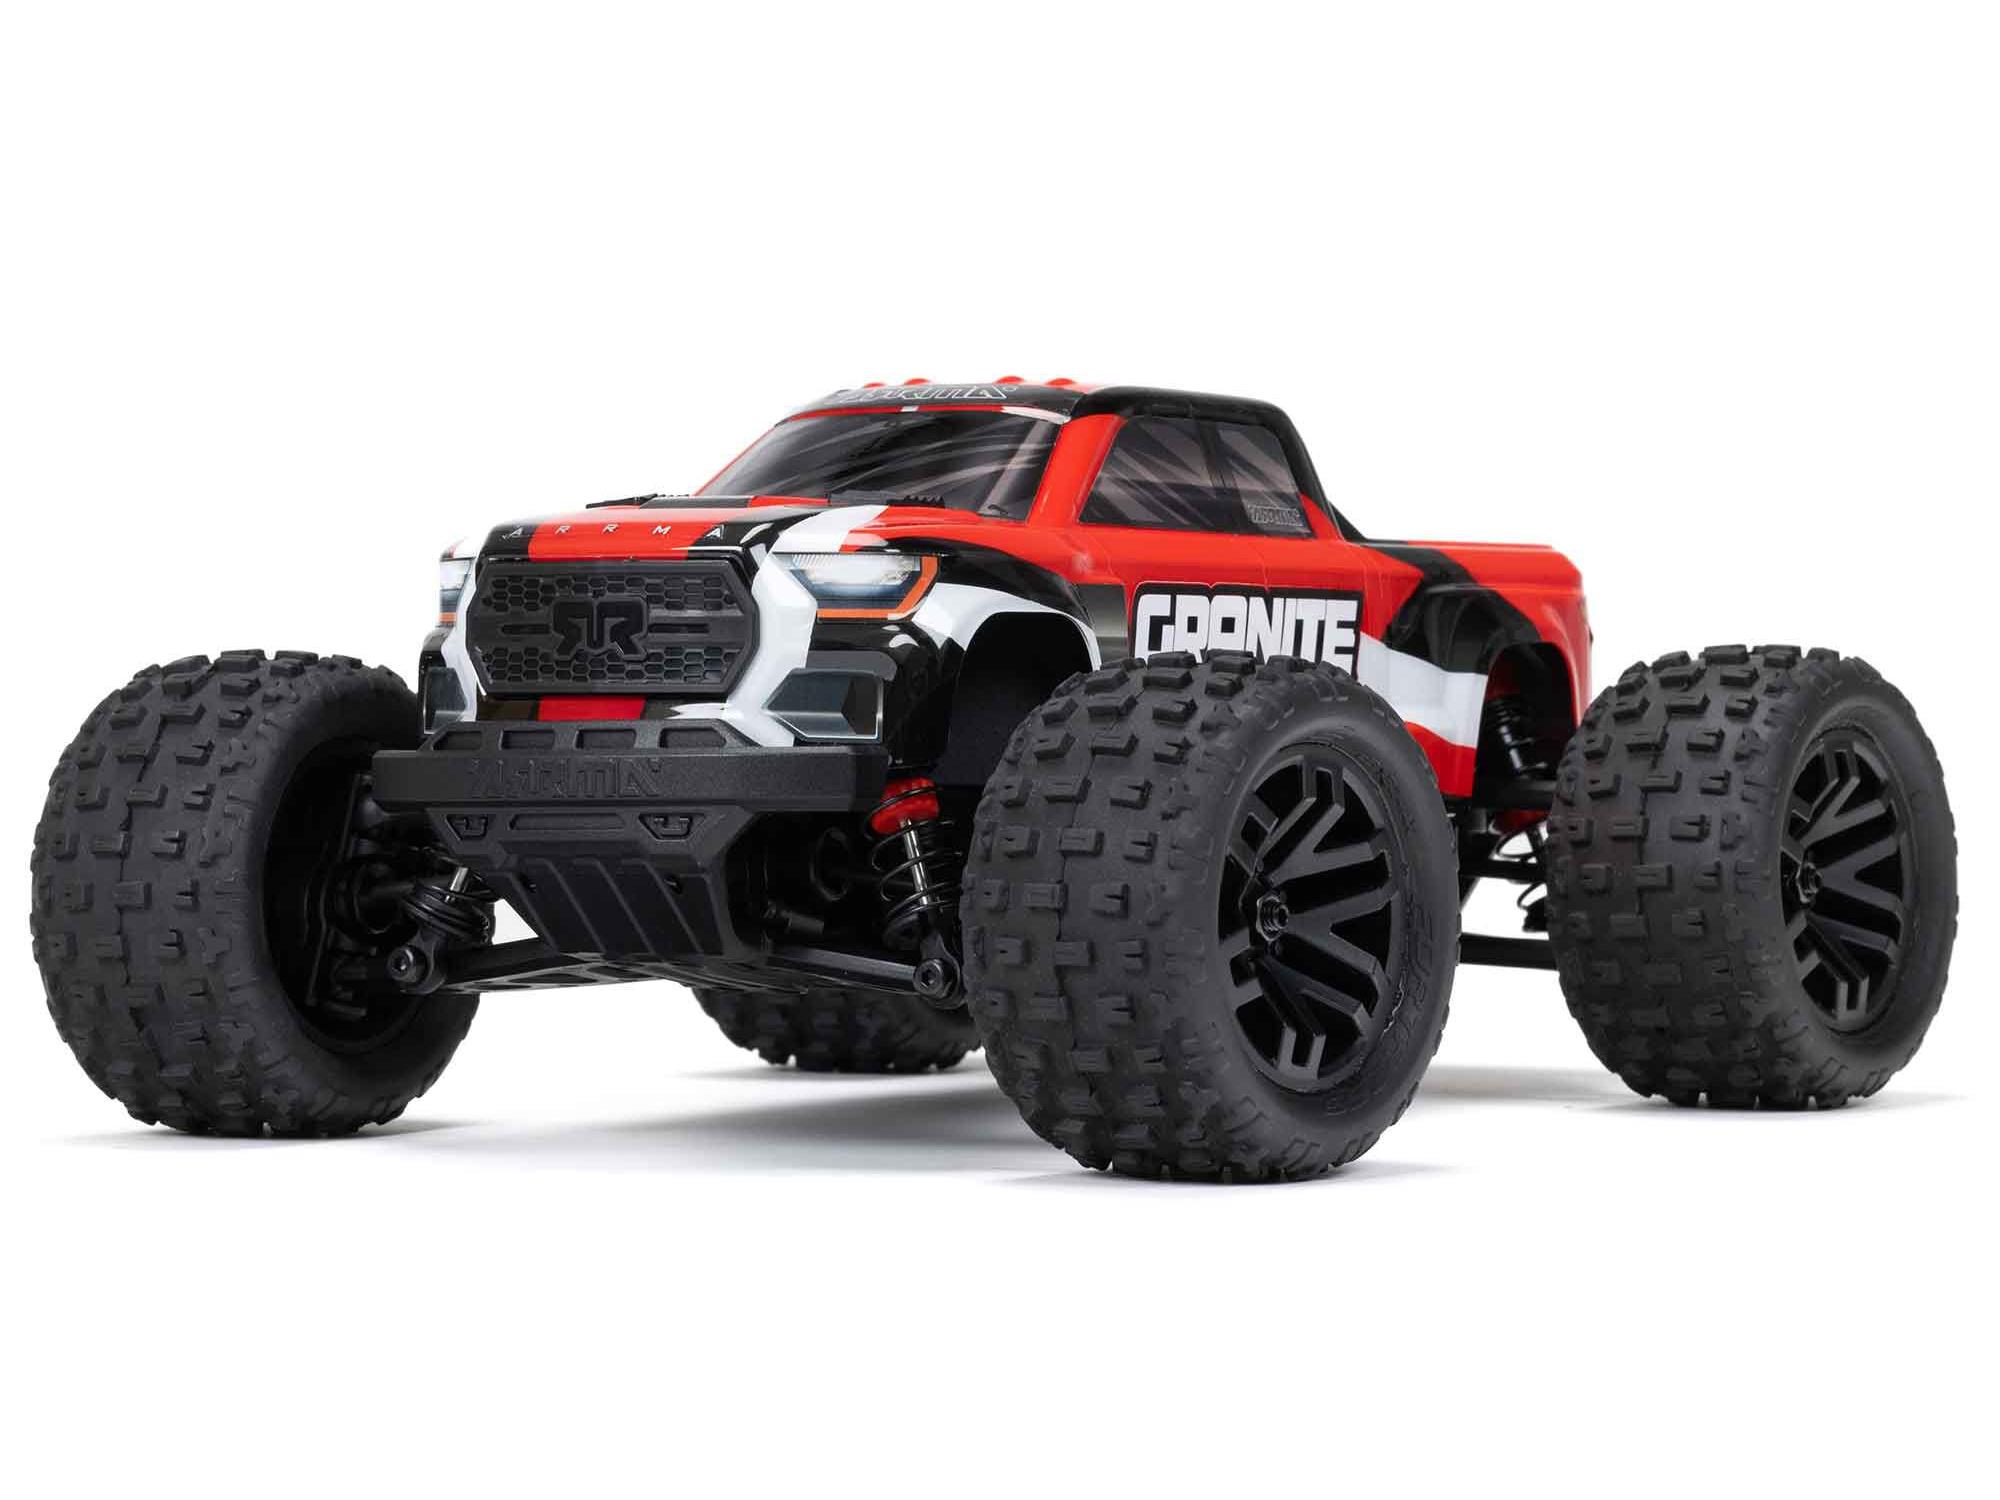 ARRMA 1/10 Granite 4X4 V3 3S BLX Brushless Monster RC Truck RTR  (Transmitter and Receiver Included, Batteries and Charger Required), Green  : Toys & Games 